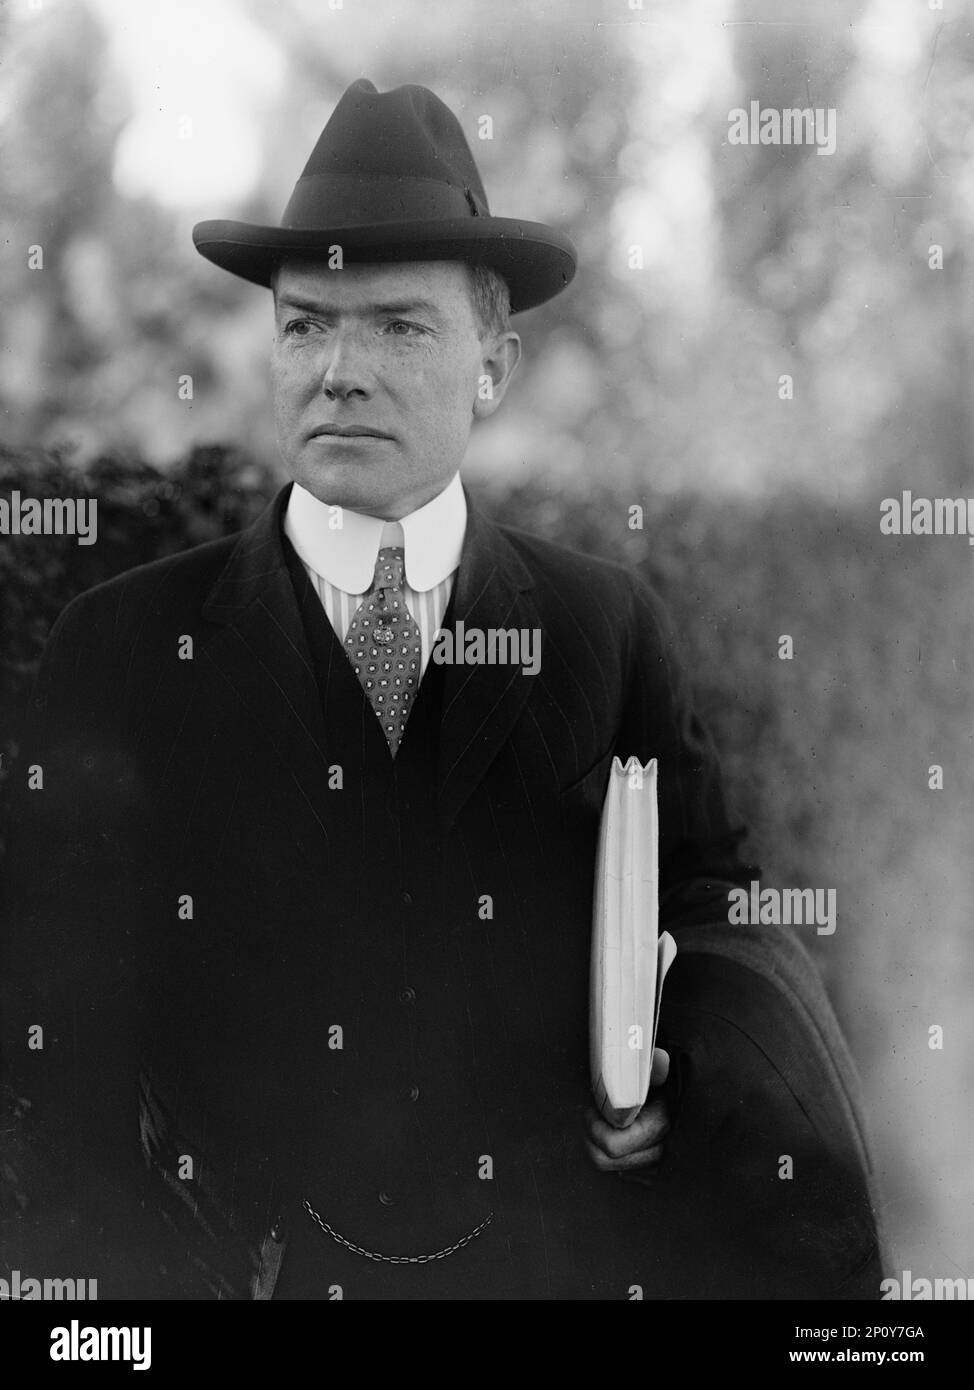 John D Rockefeller Jr is shown with his father in 1925, 1925. After News  Photo - Getty Images